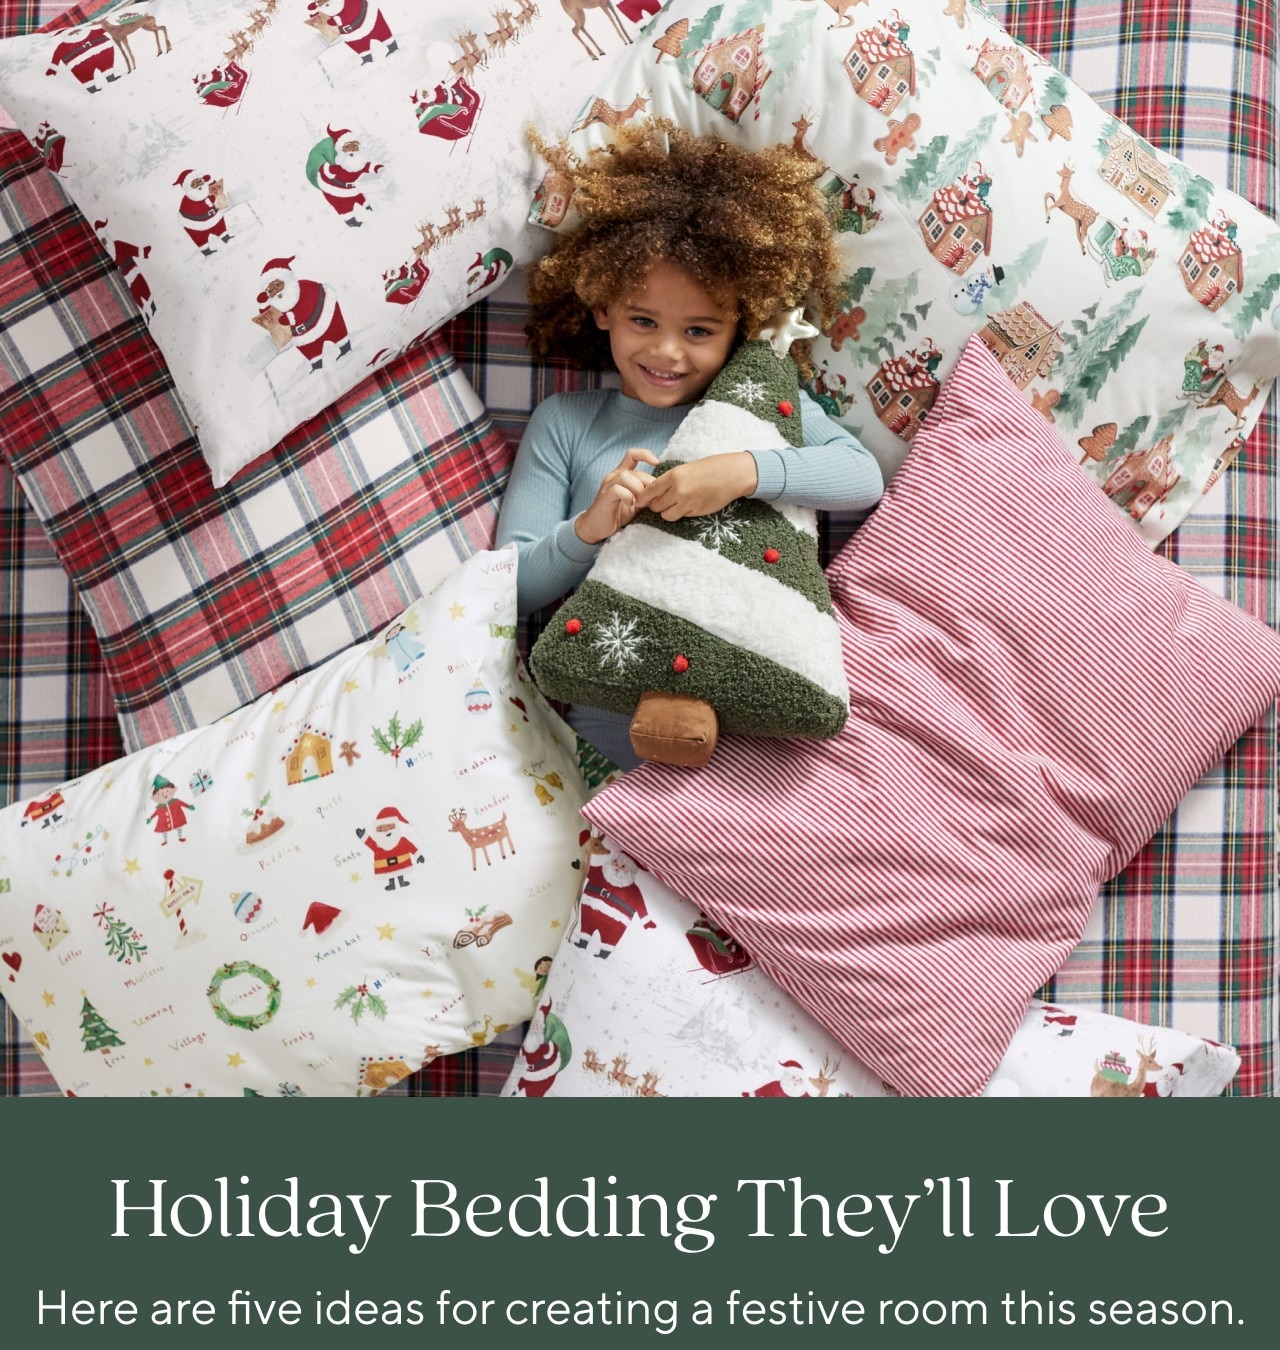 HOLIDAY BEDDING THEY'LL LOVE